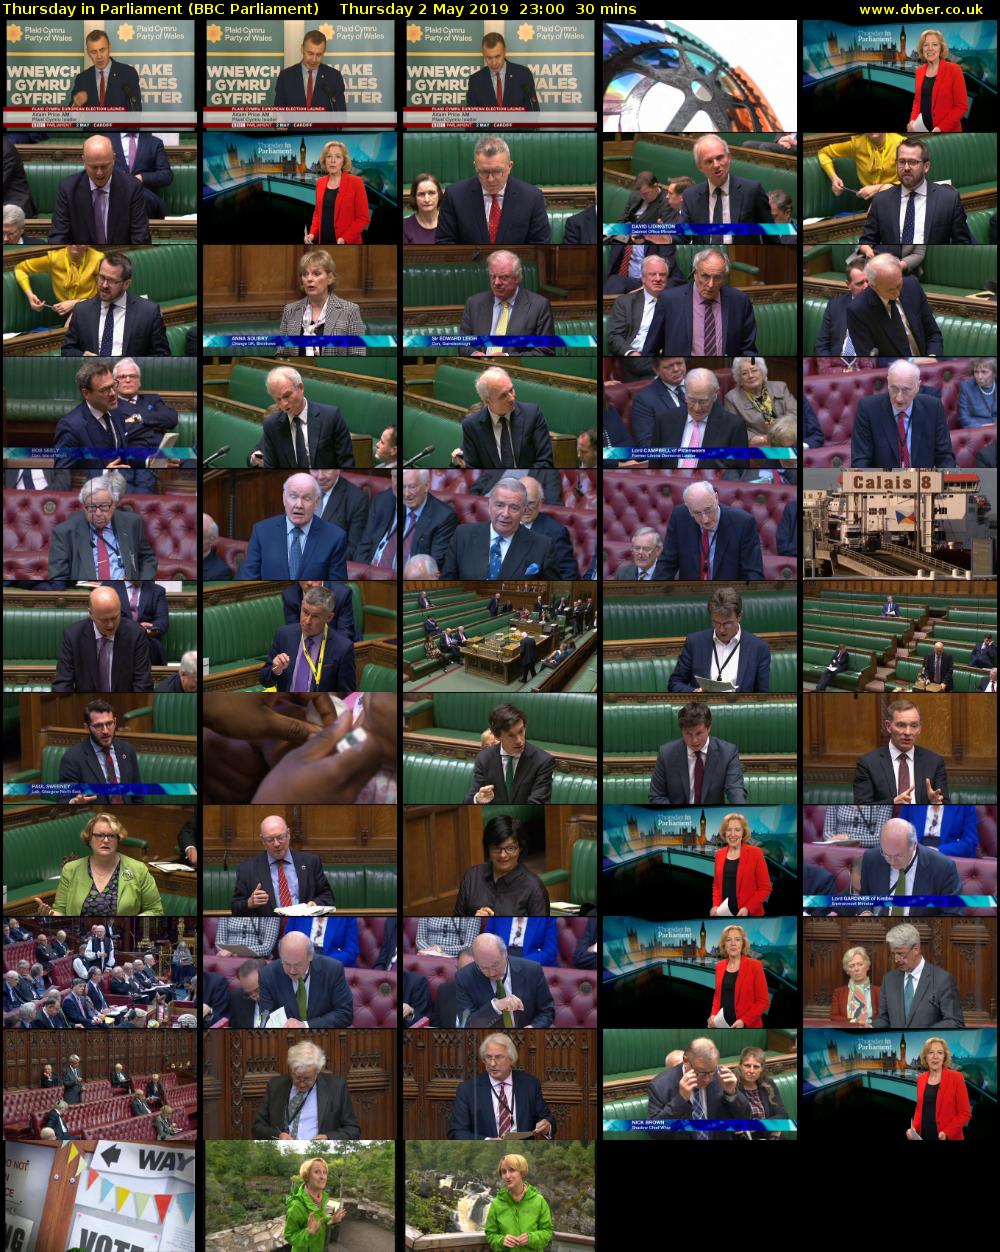 Thursday in Parliament (BBC Parliament) Thursday 2 May 2019 23:00 - 23:30